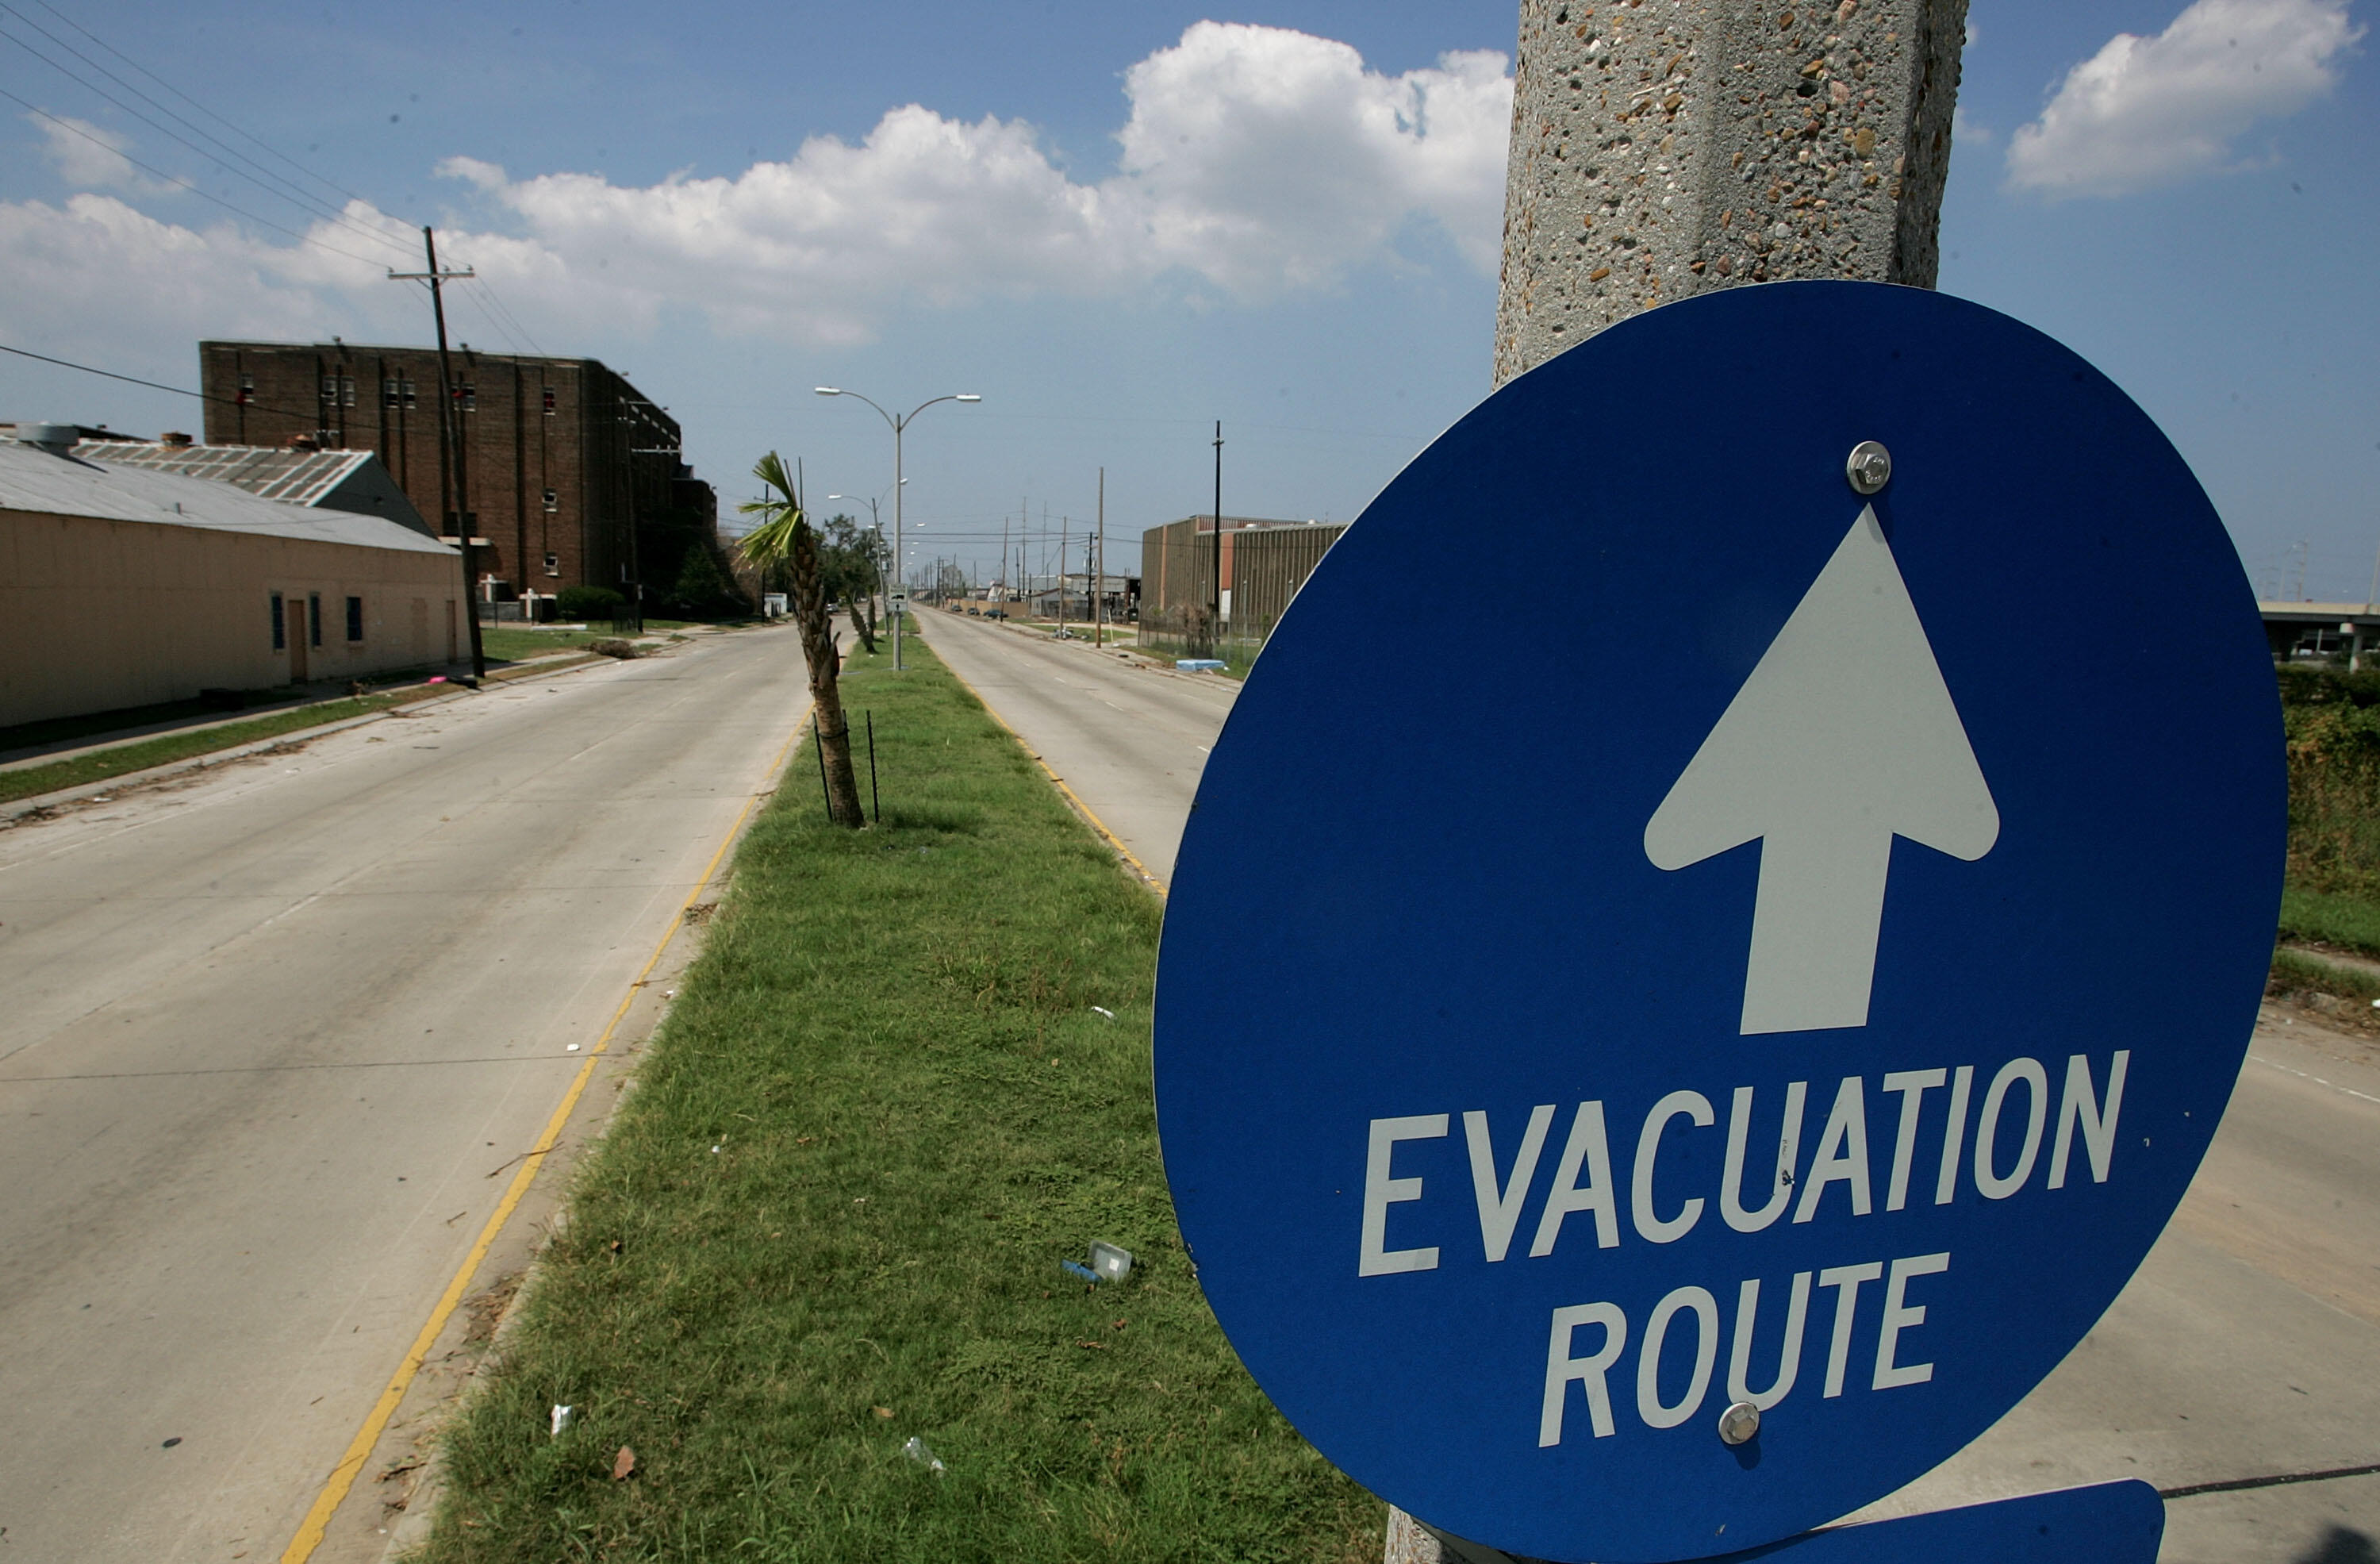 NEW ORLEANS - SEPTEMBER 21:  An evacuation route sign hangs on a pole near an empty road September 21, 2005 in New Orleans, Louisiana. Mayor C. Ray Nagin has ordered the evacuation of New Orleans as Hurricane Rita makes its way toward the Gulf Coast.  (Ph